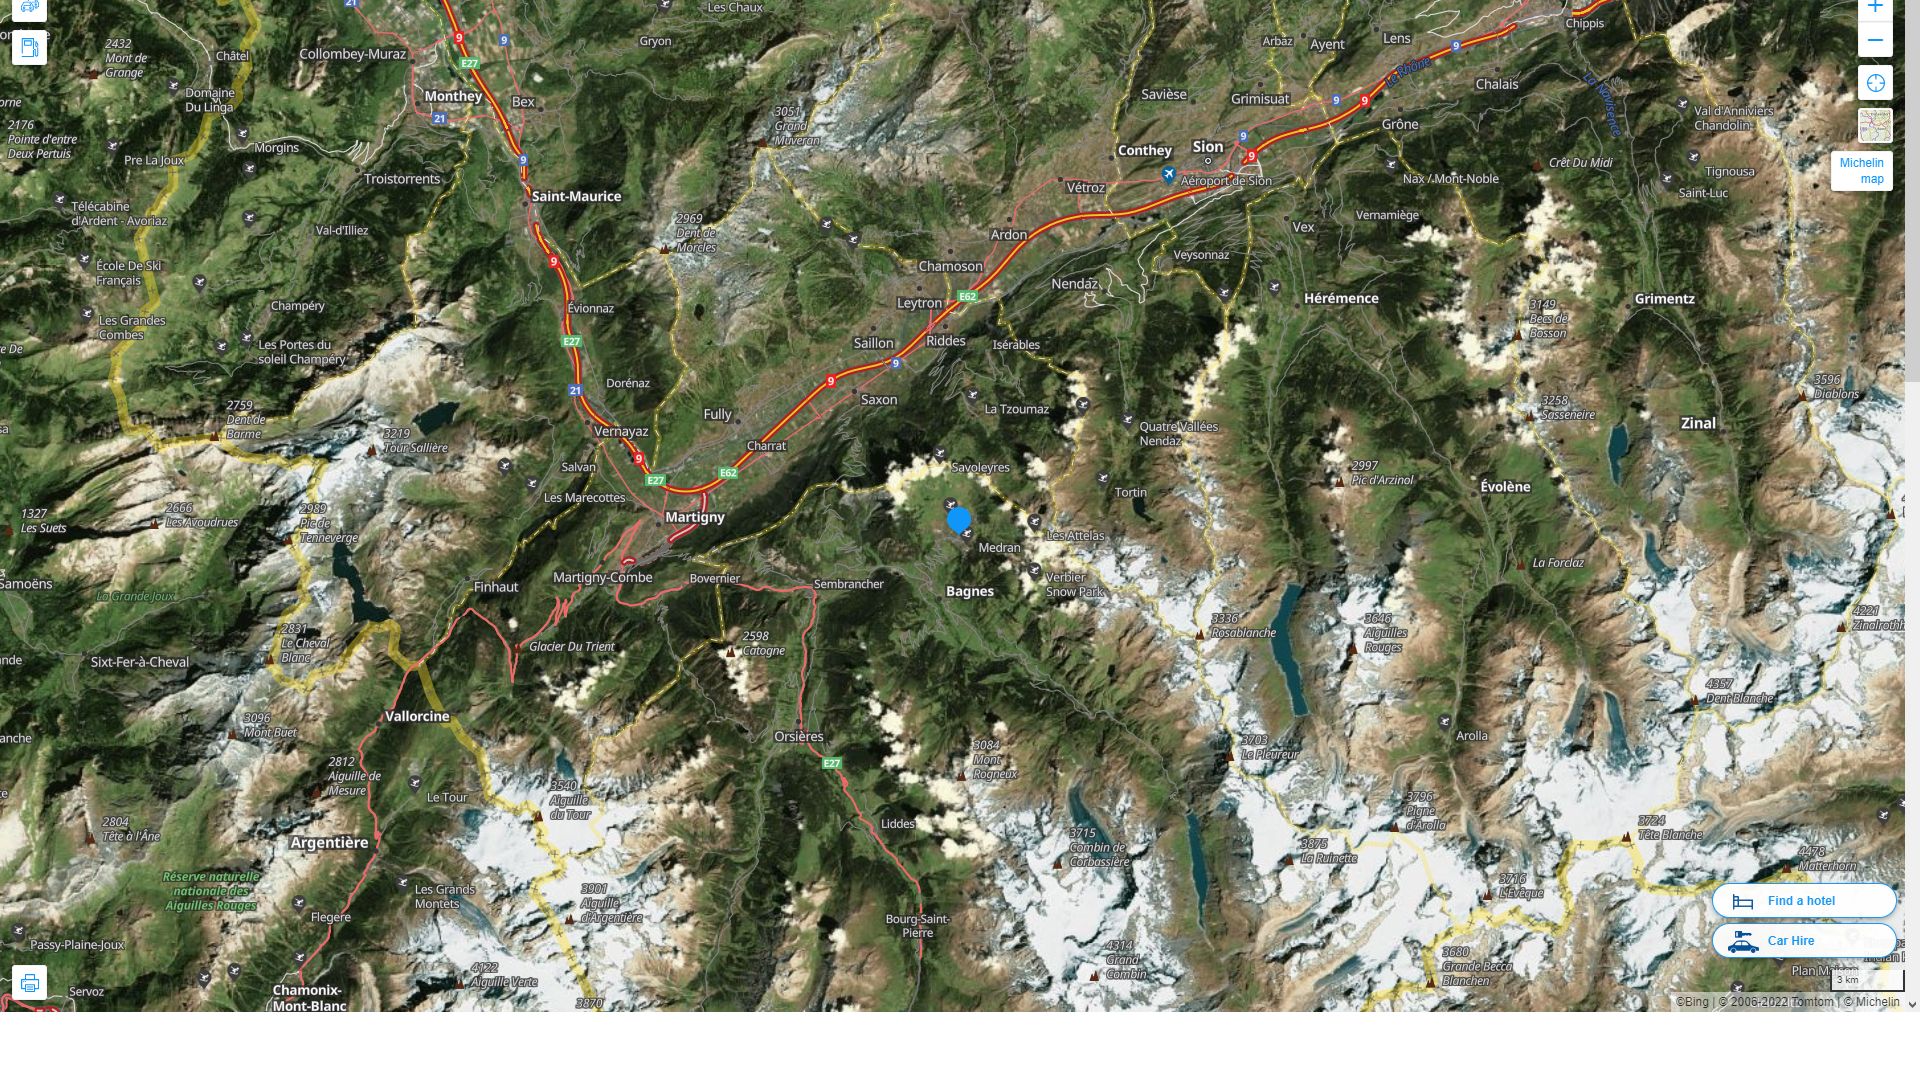 Verbier Highway and Road Map with Satellite View